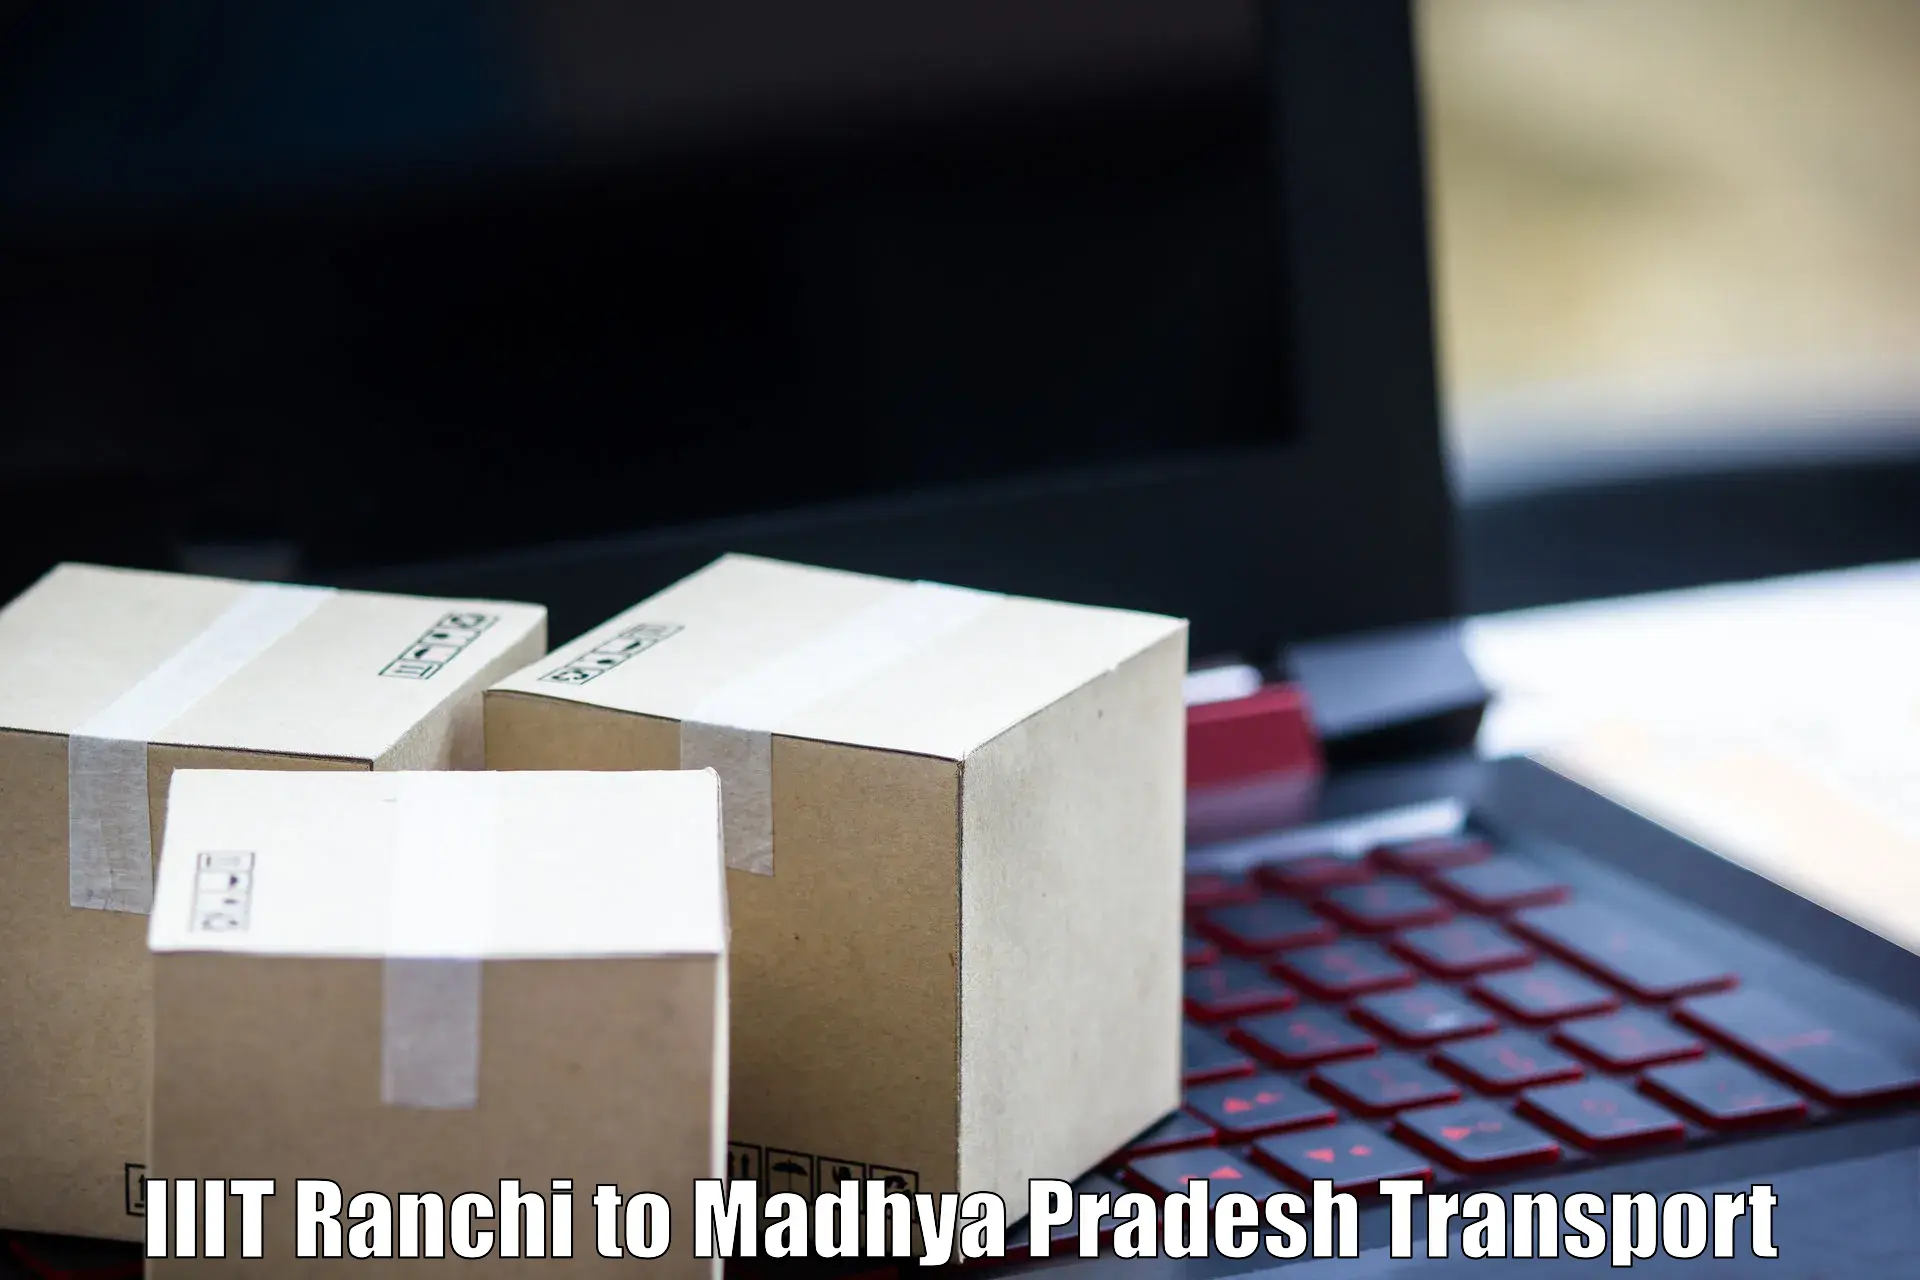 Cargo train transport services in IIIT Ranchi to Chanderi